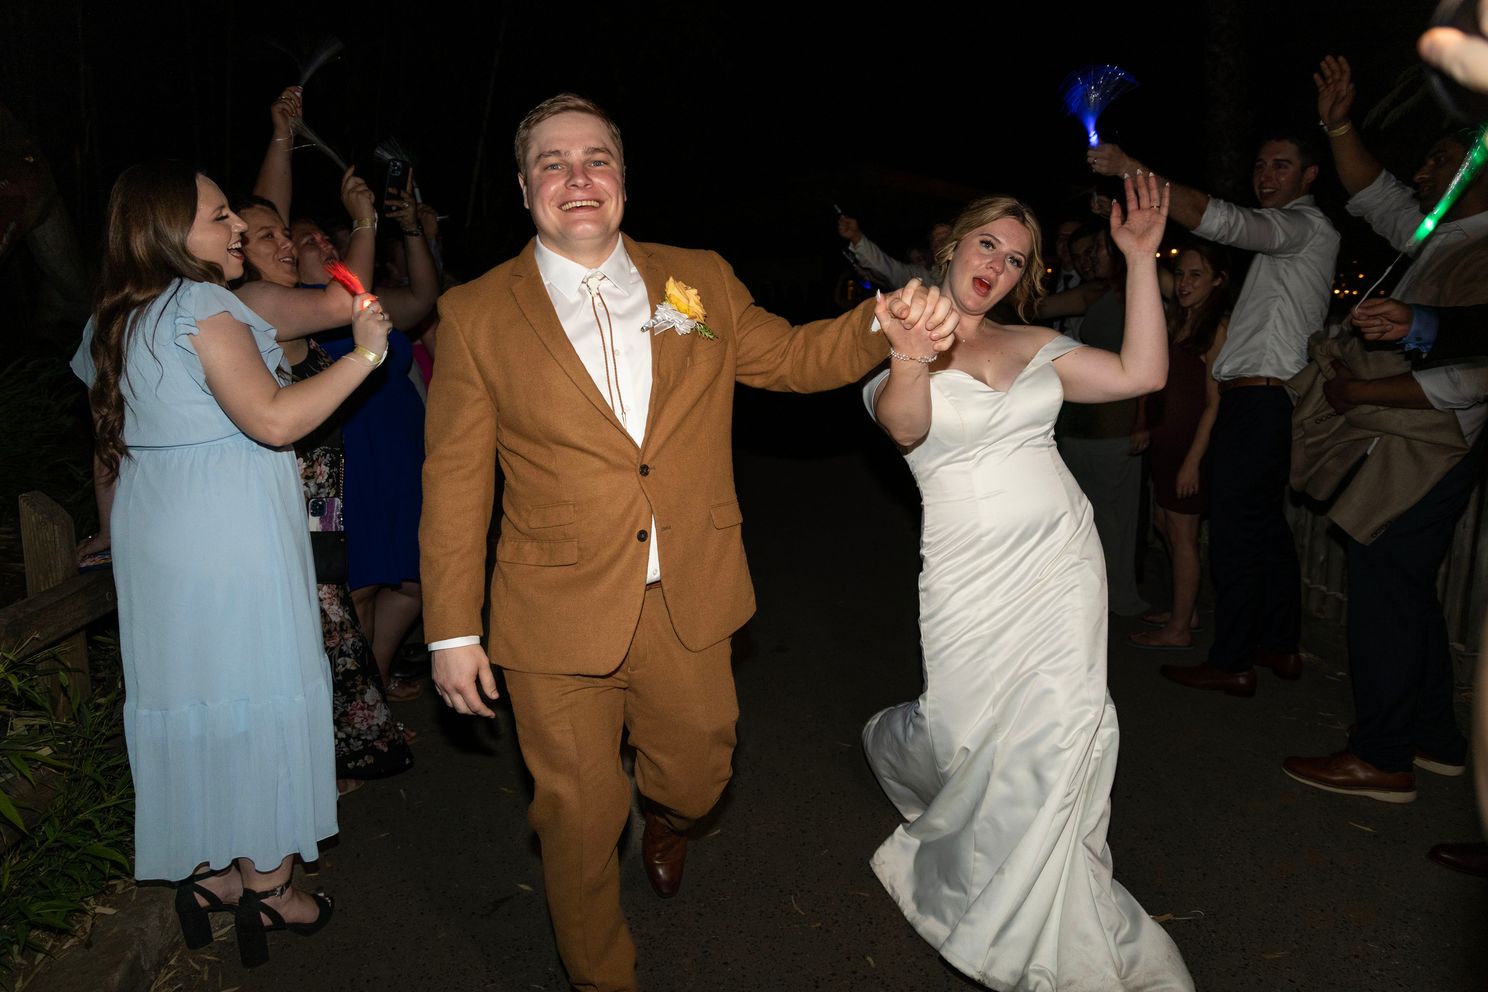 Shelby and John leaving the Sacramento Zoo wedding dancing through the exit with the guests.